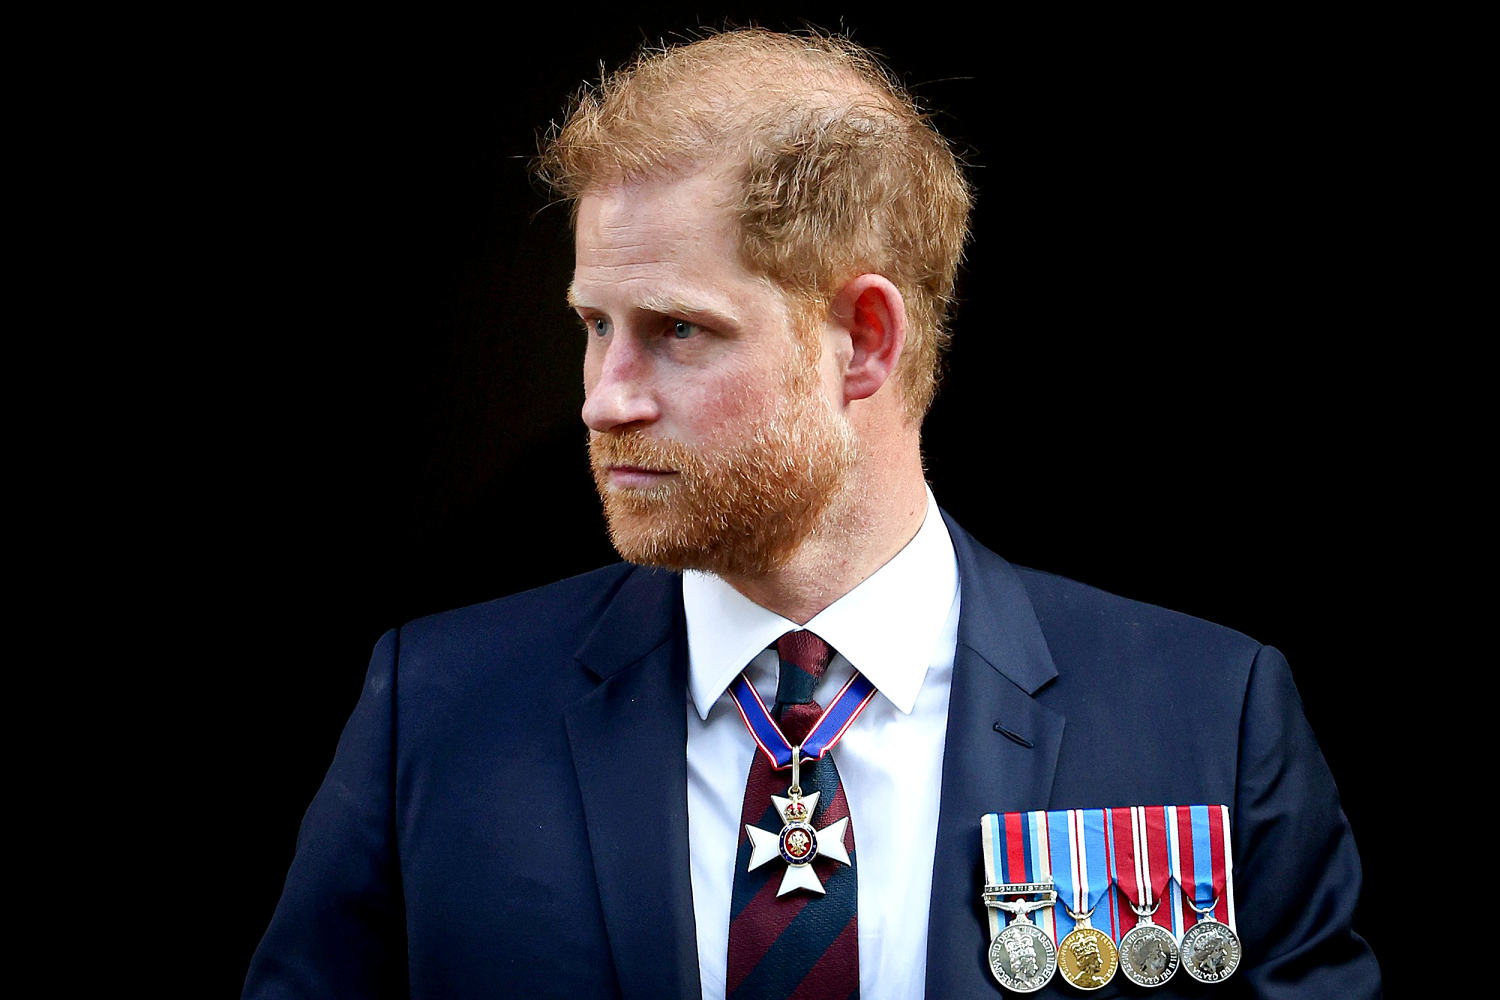 Pat Tillman’s mom calls Prince Harry ‘divisive’ after he’s picked for late son’s award